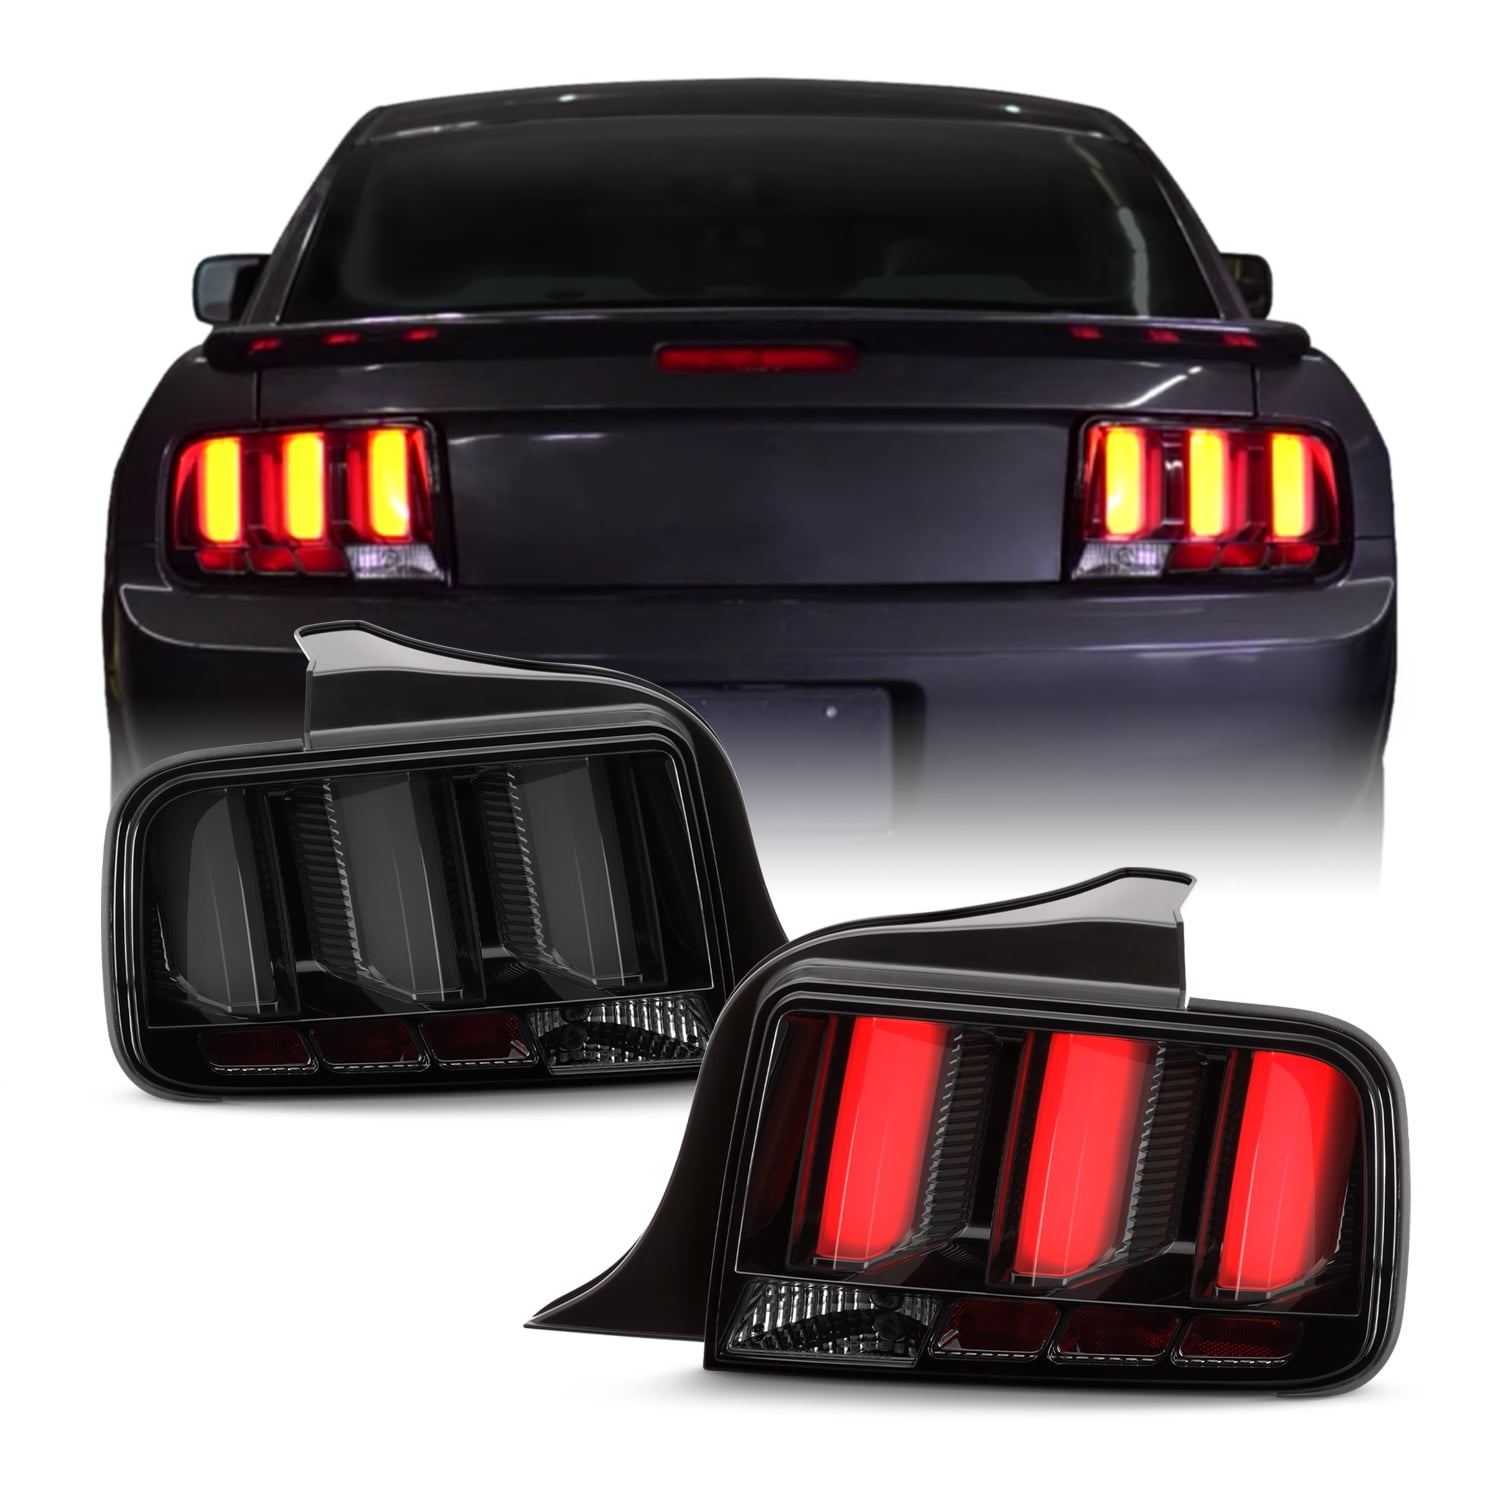 Each United Pacific 110107 1969 Ford Mustang Sequential LED Tail Light